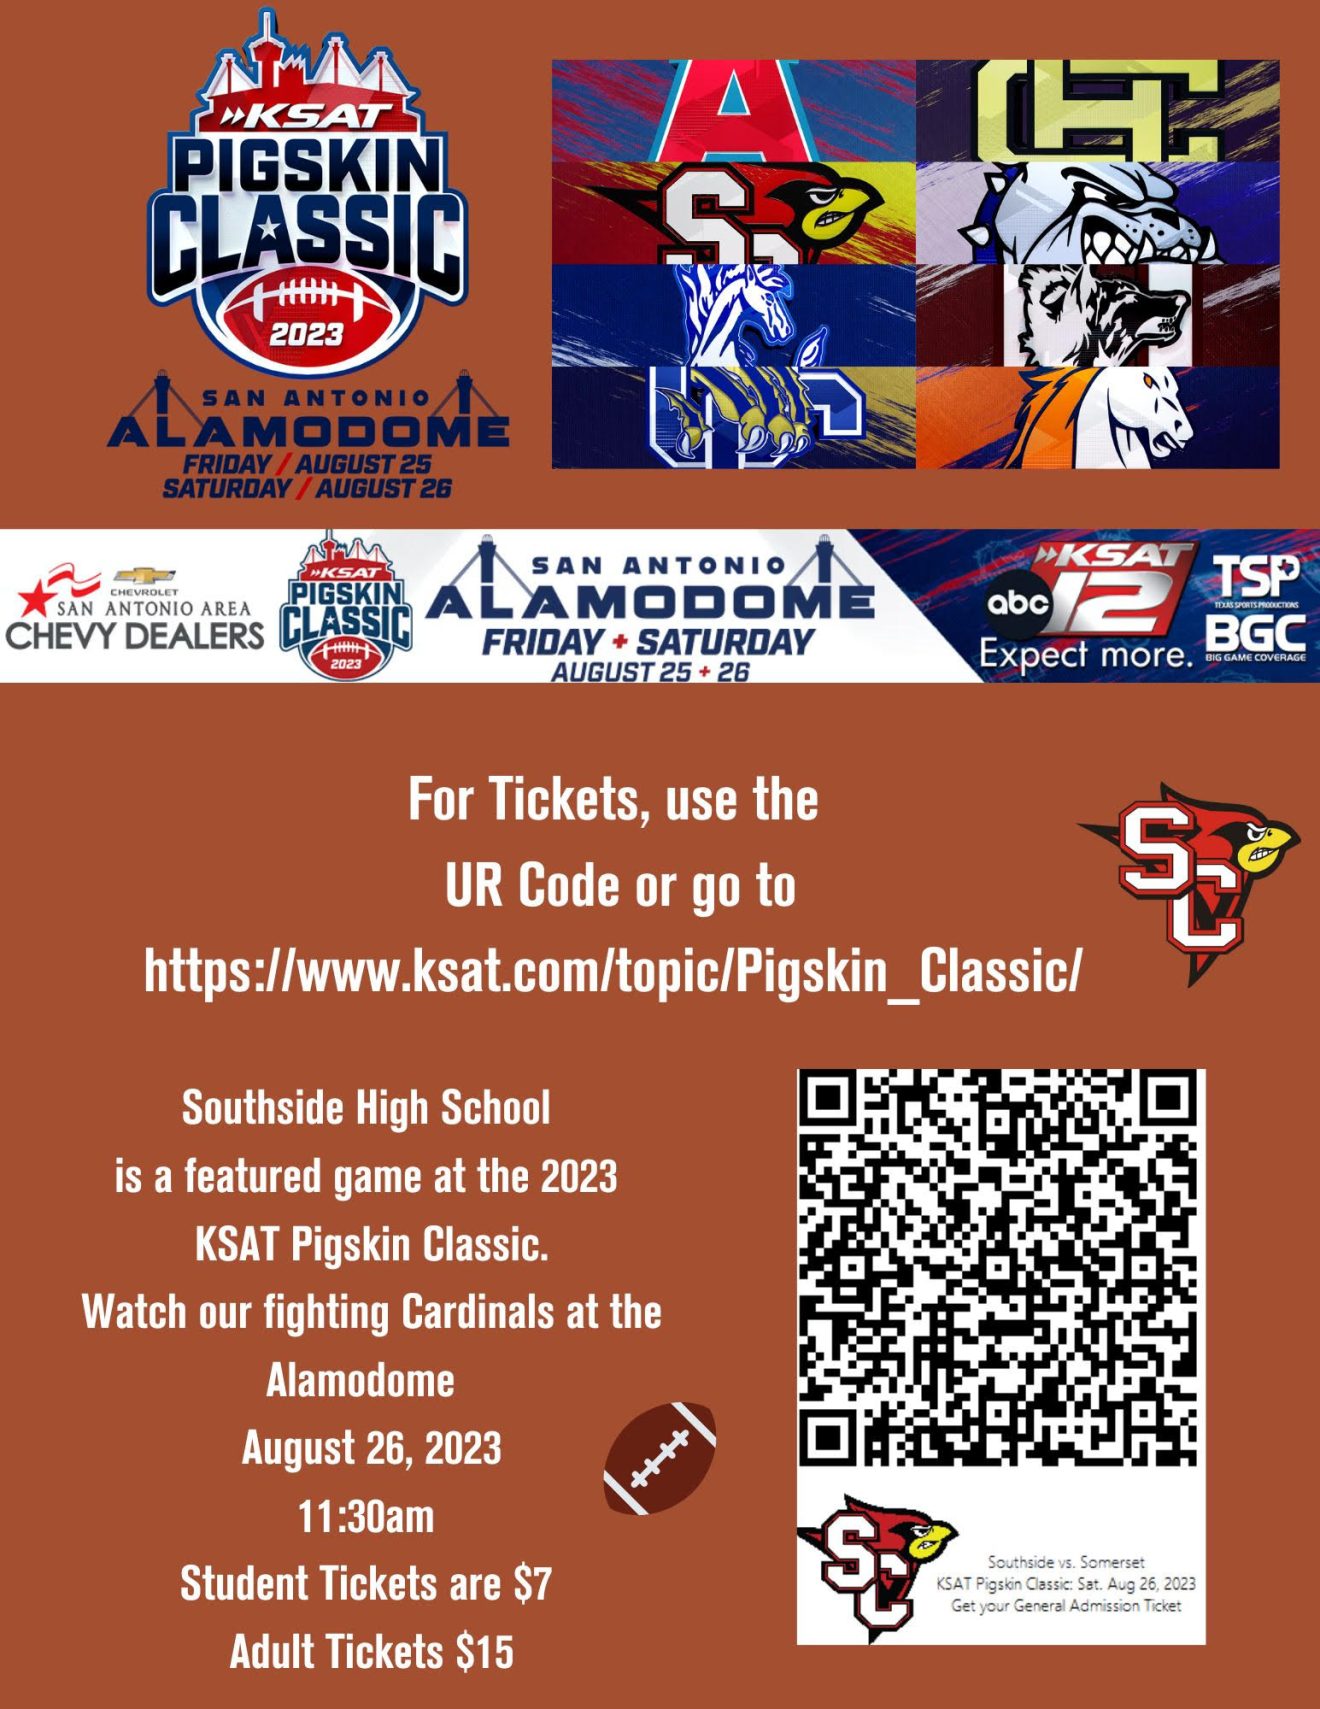 KSAT 12 Pigskin Classic Tickets on Sale now for Southside Cardinals vs. Somerset Bulldogs